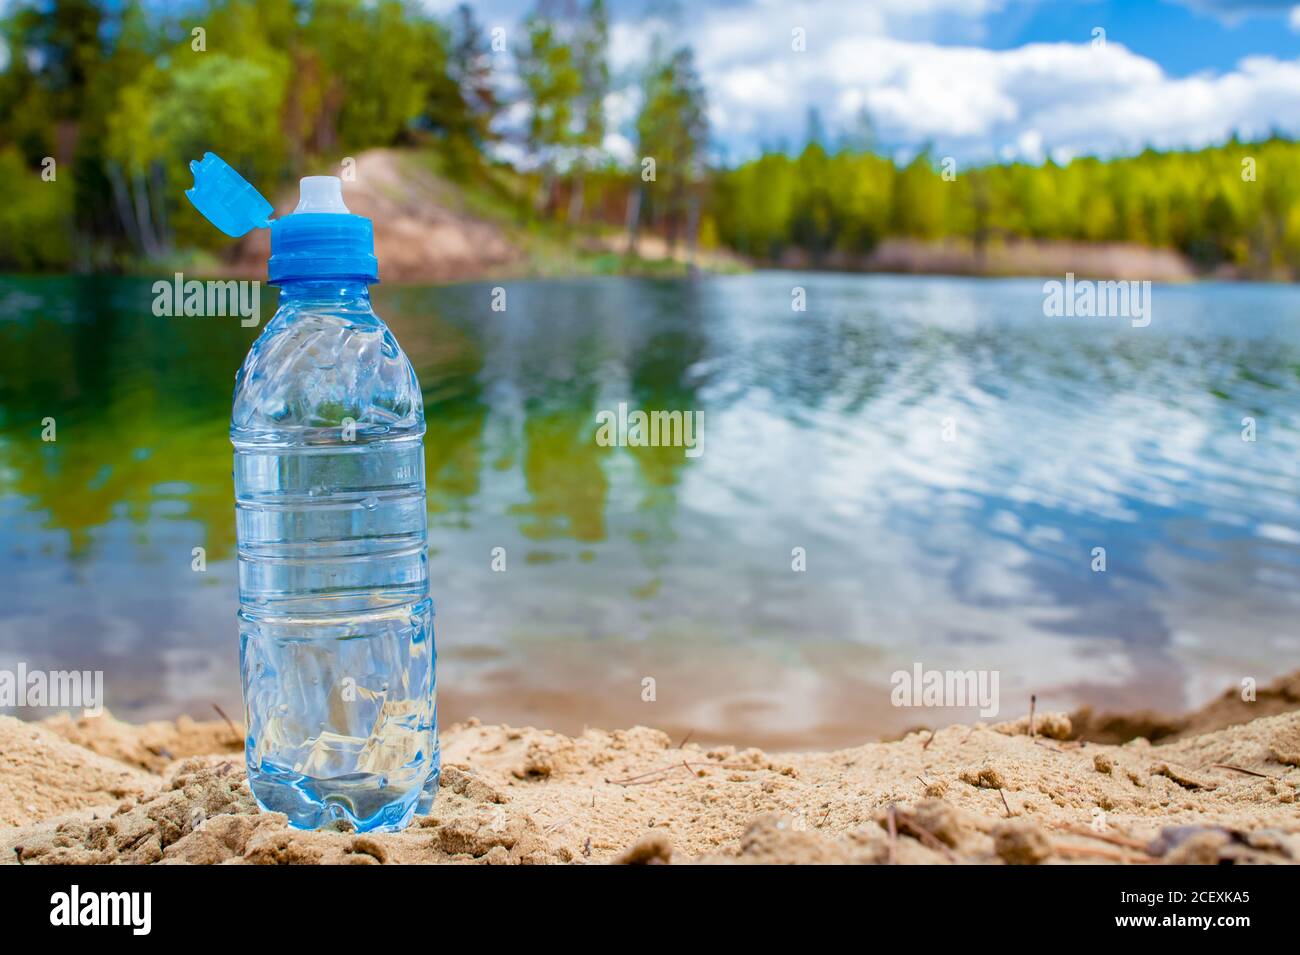 https://c8.alamy.com/comp/2CEXKA5/a-blue-plastic-bottle-with-an-open-lid-stands-on-a-sandy-beach-against-the-backdrop-of-a-wild-lake-background-2CEXKA5.jpg